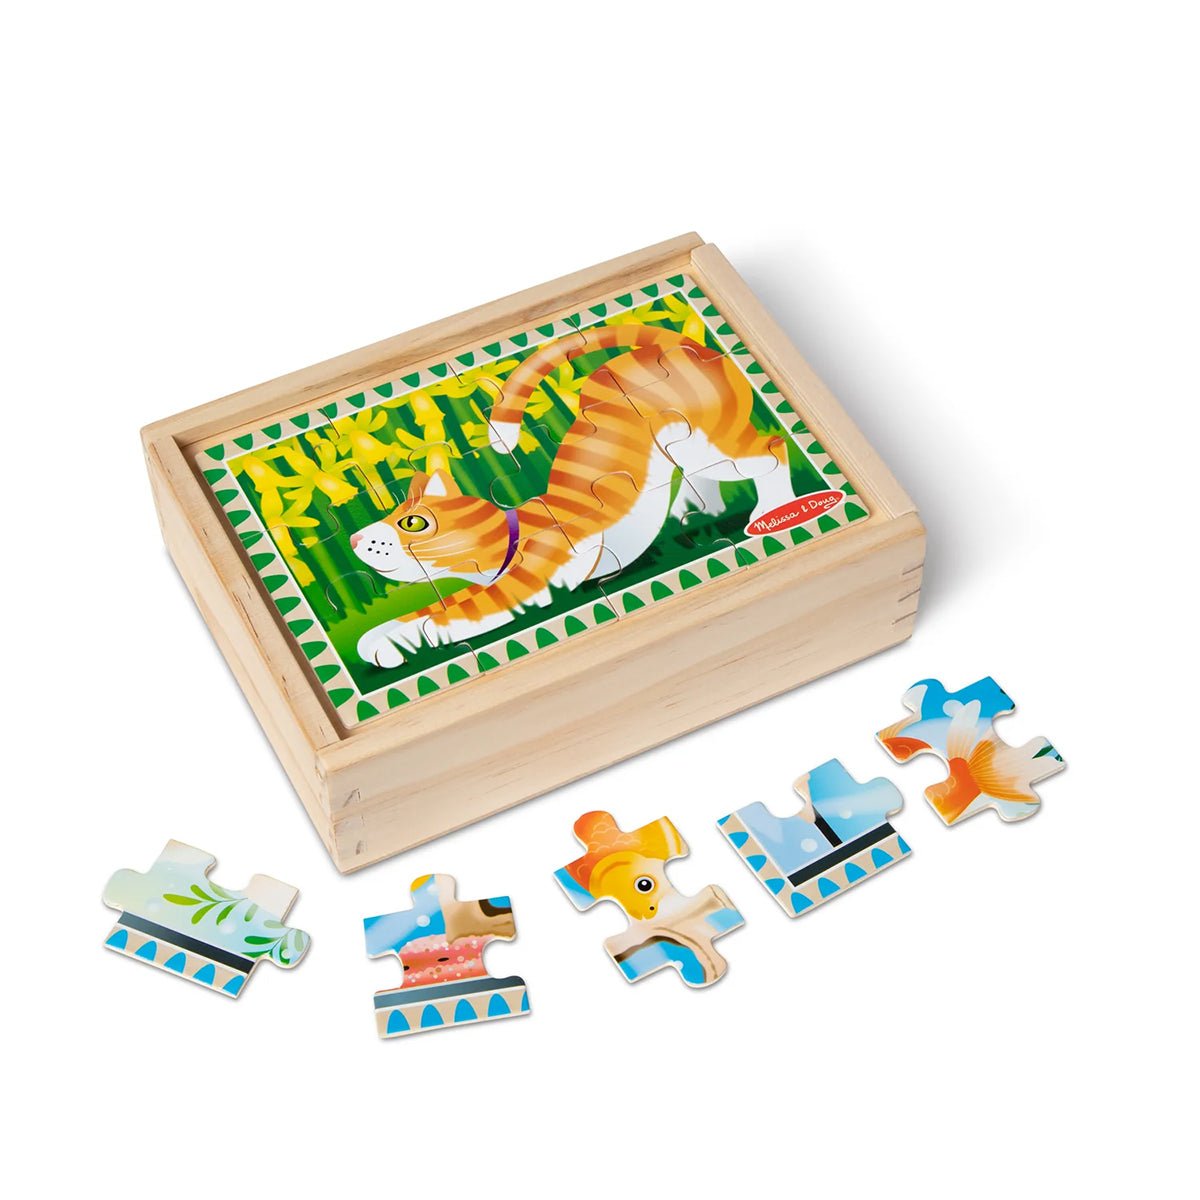 4 Pet Jigsaw puzzles in a box | Melissa and Doug